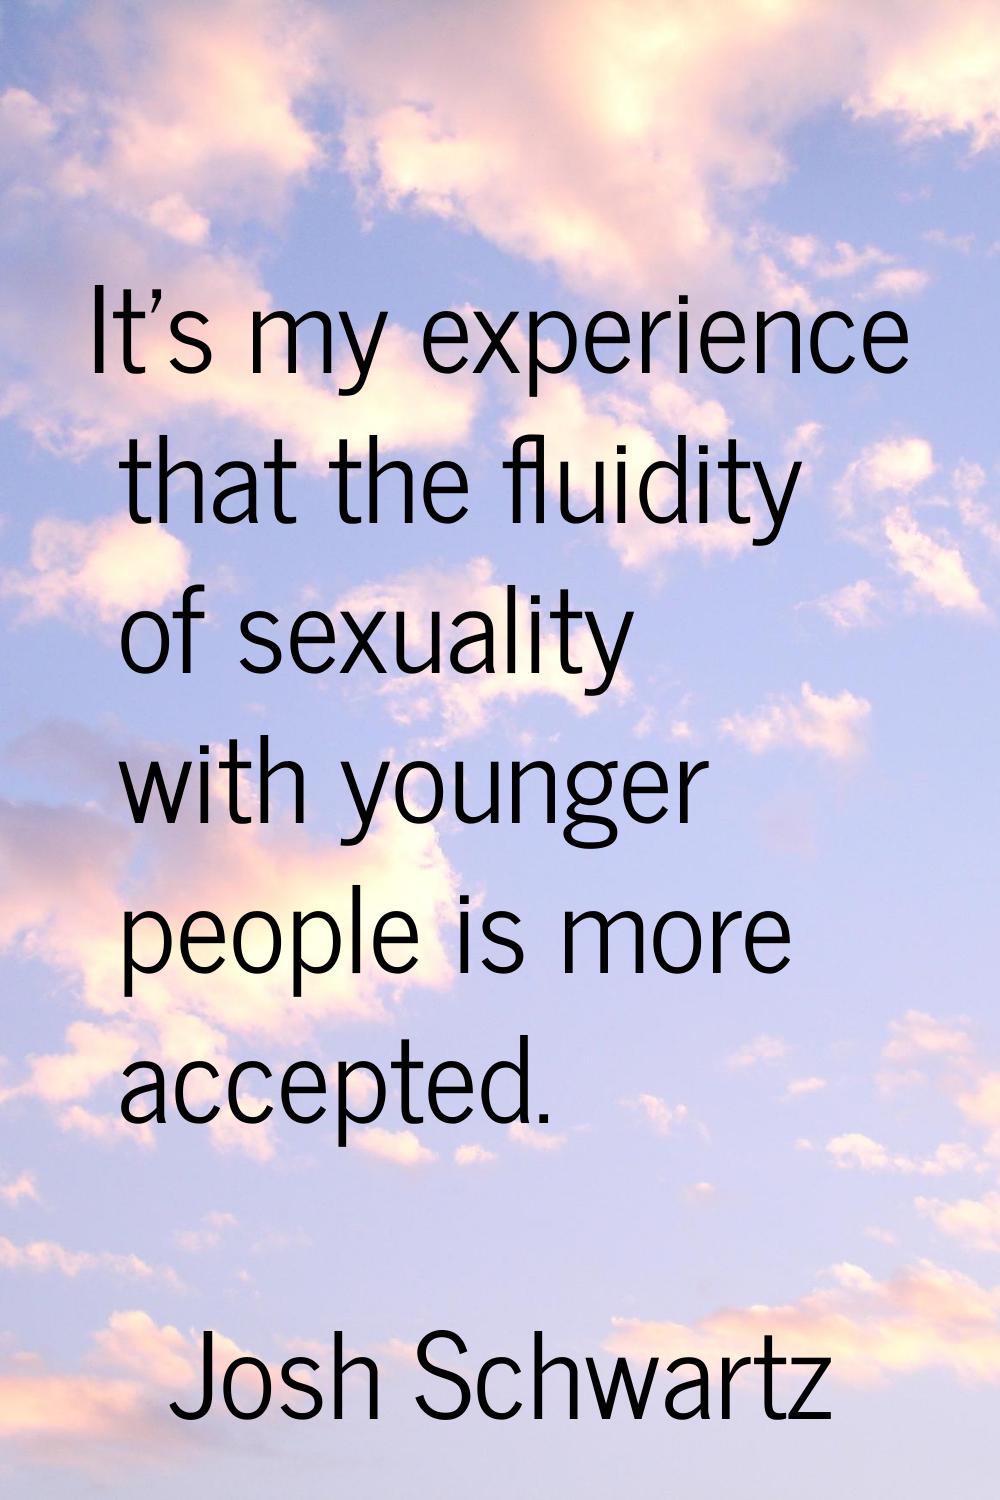 It's my experience that the fluidity of sexuality with younger people is more accepted.